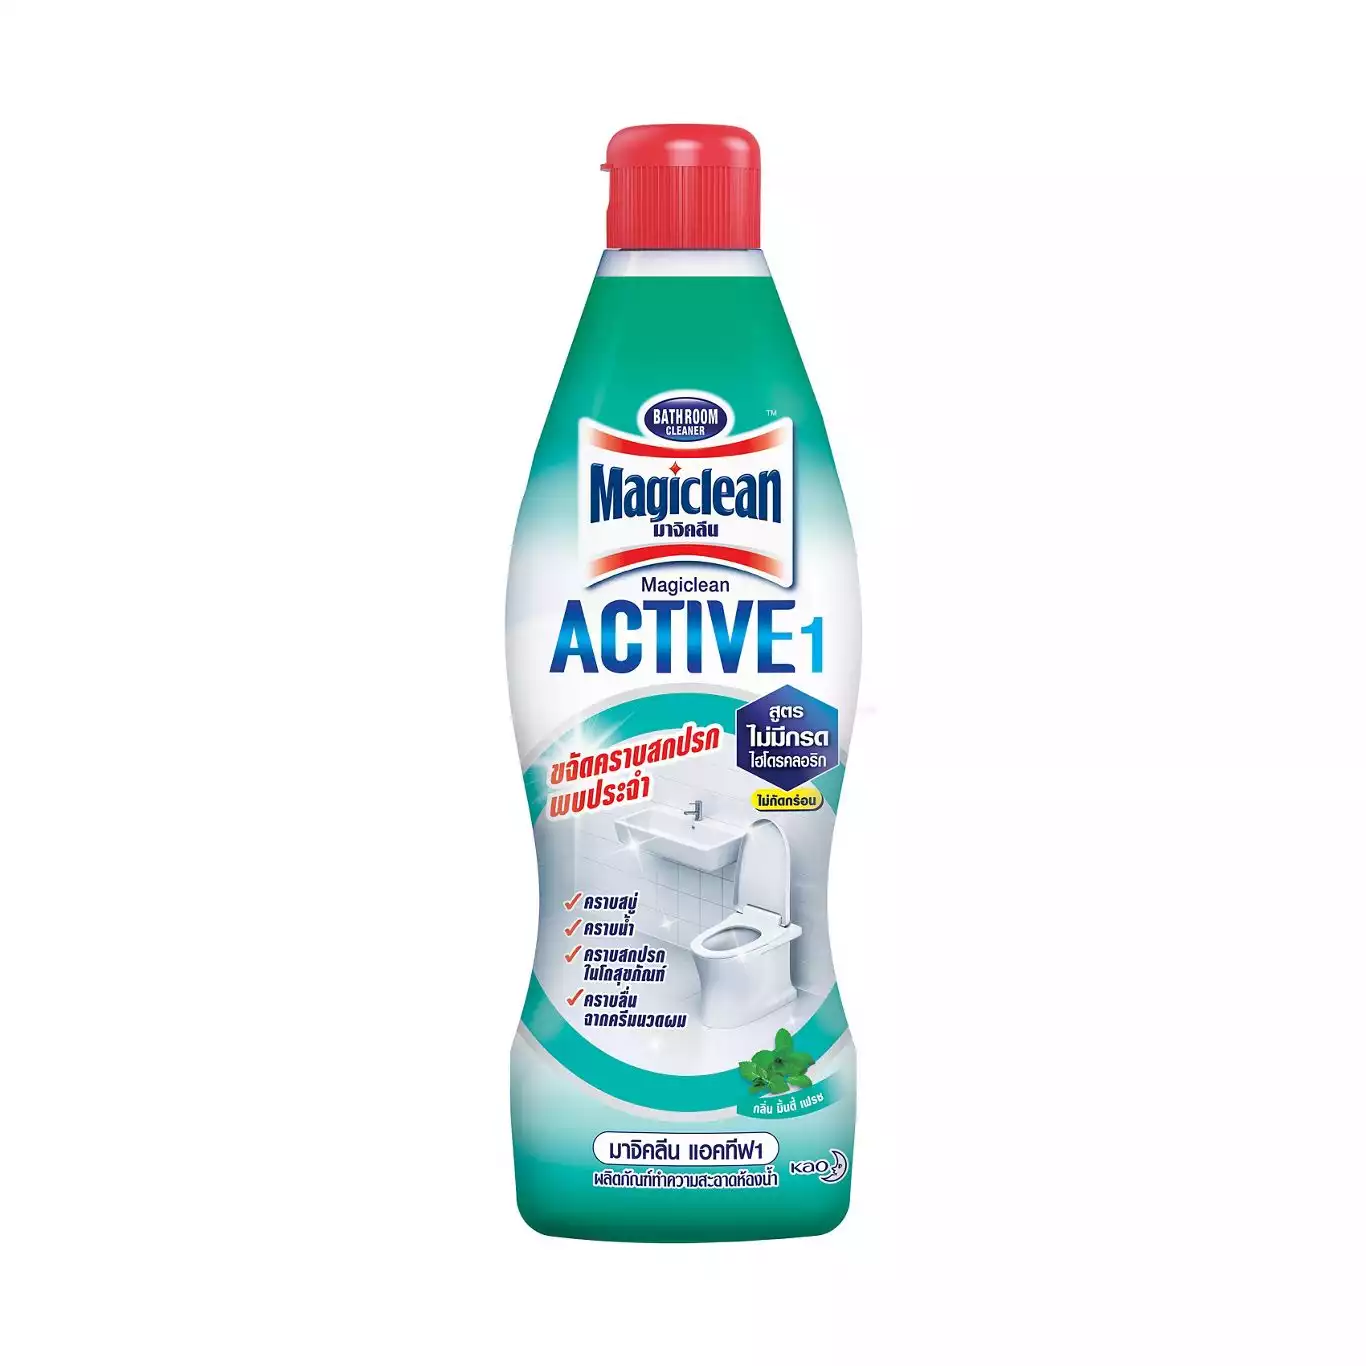 Magiclean Active Minty fresh